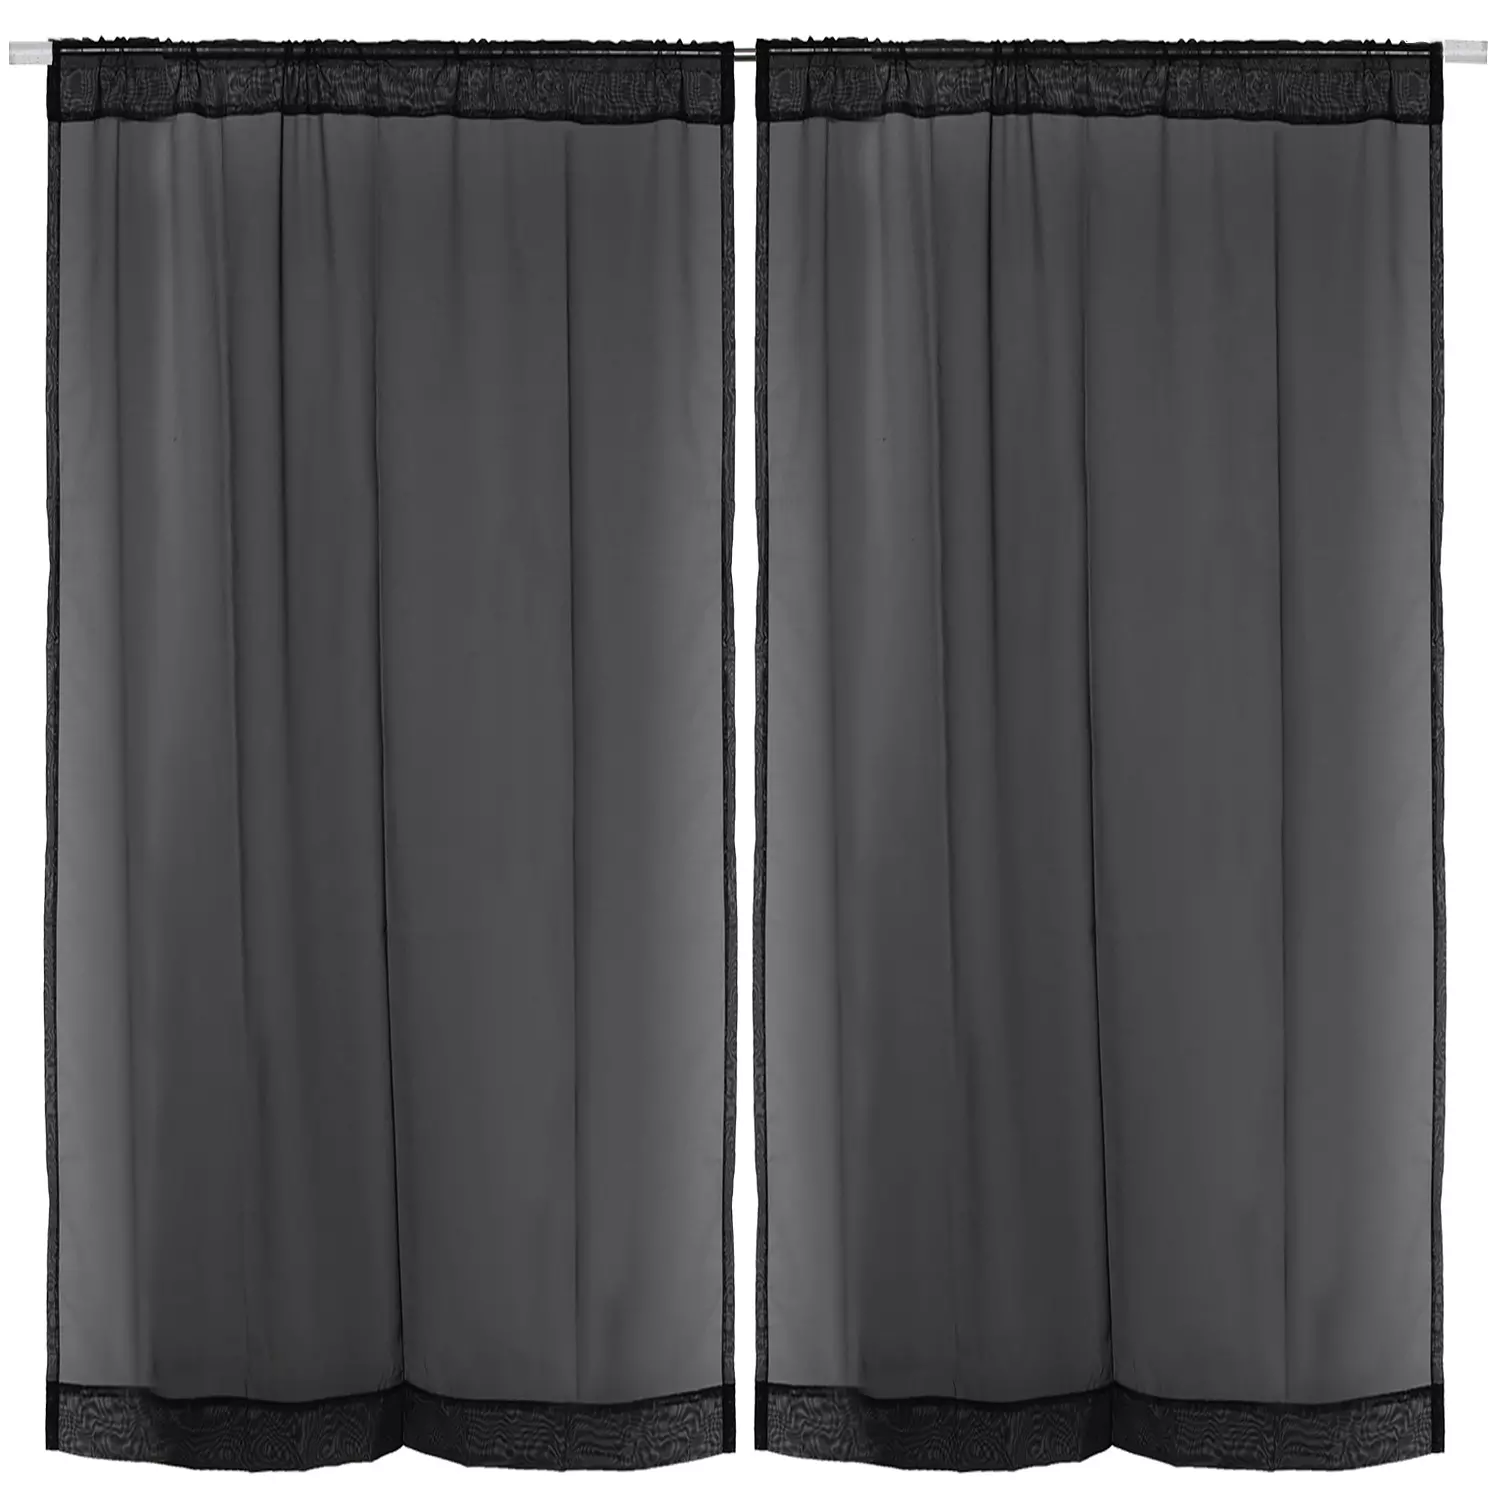 Two semi-sheer voile panels with rod pocket, 54"x84", black